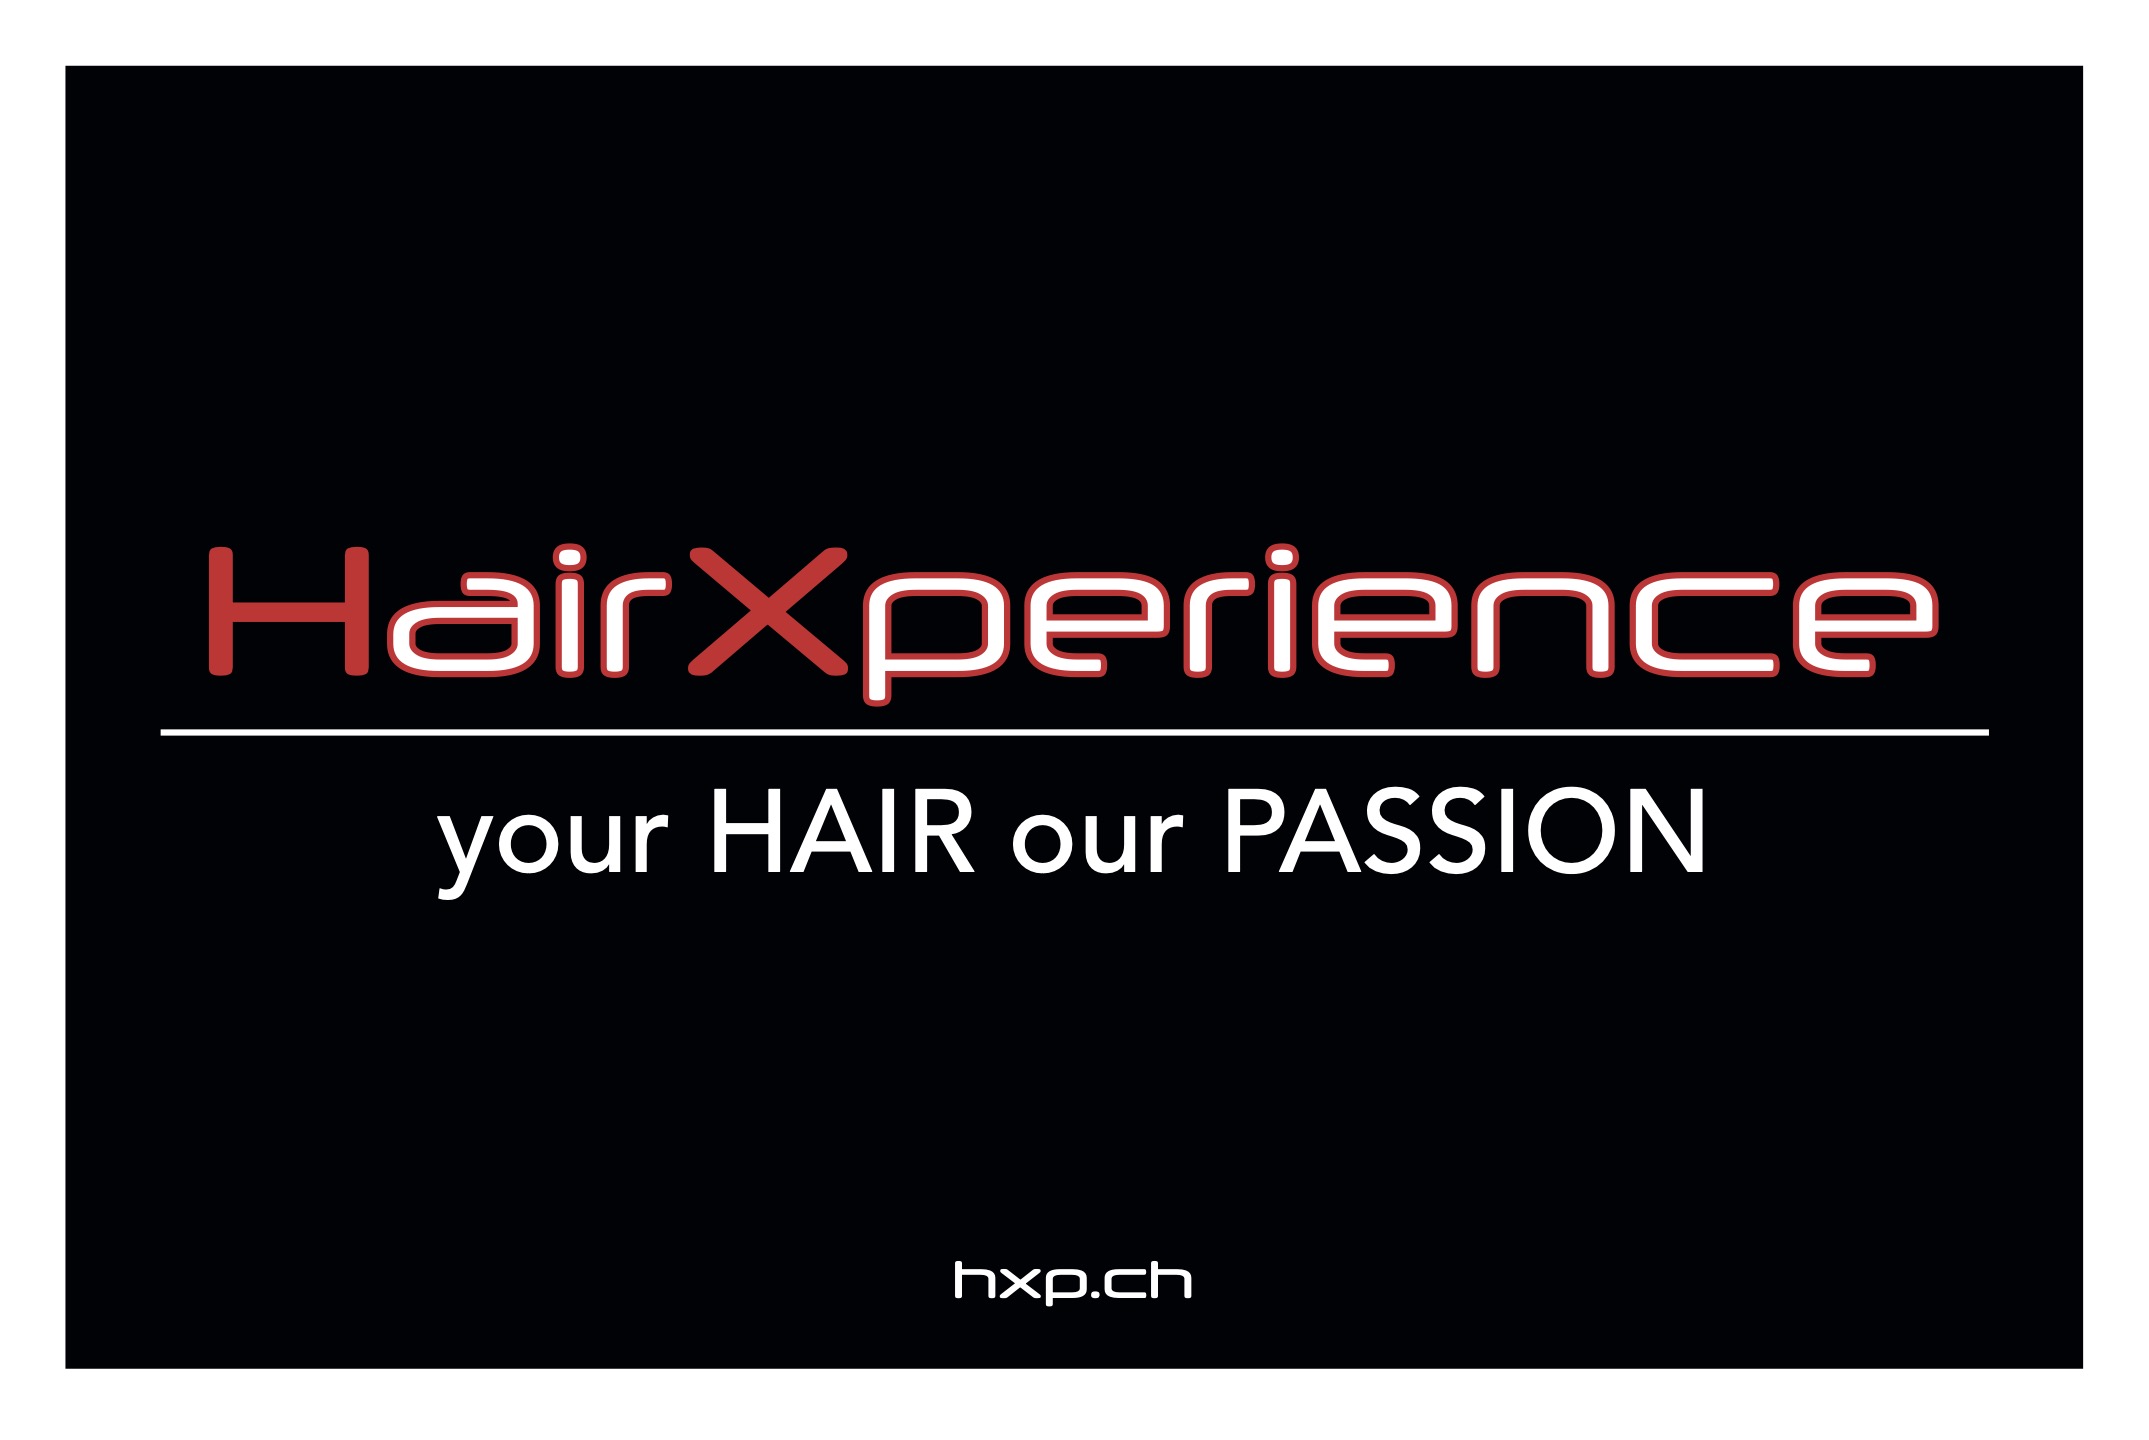 HairXperience - Hairstyling & Drinks